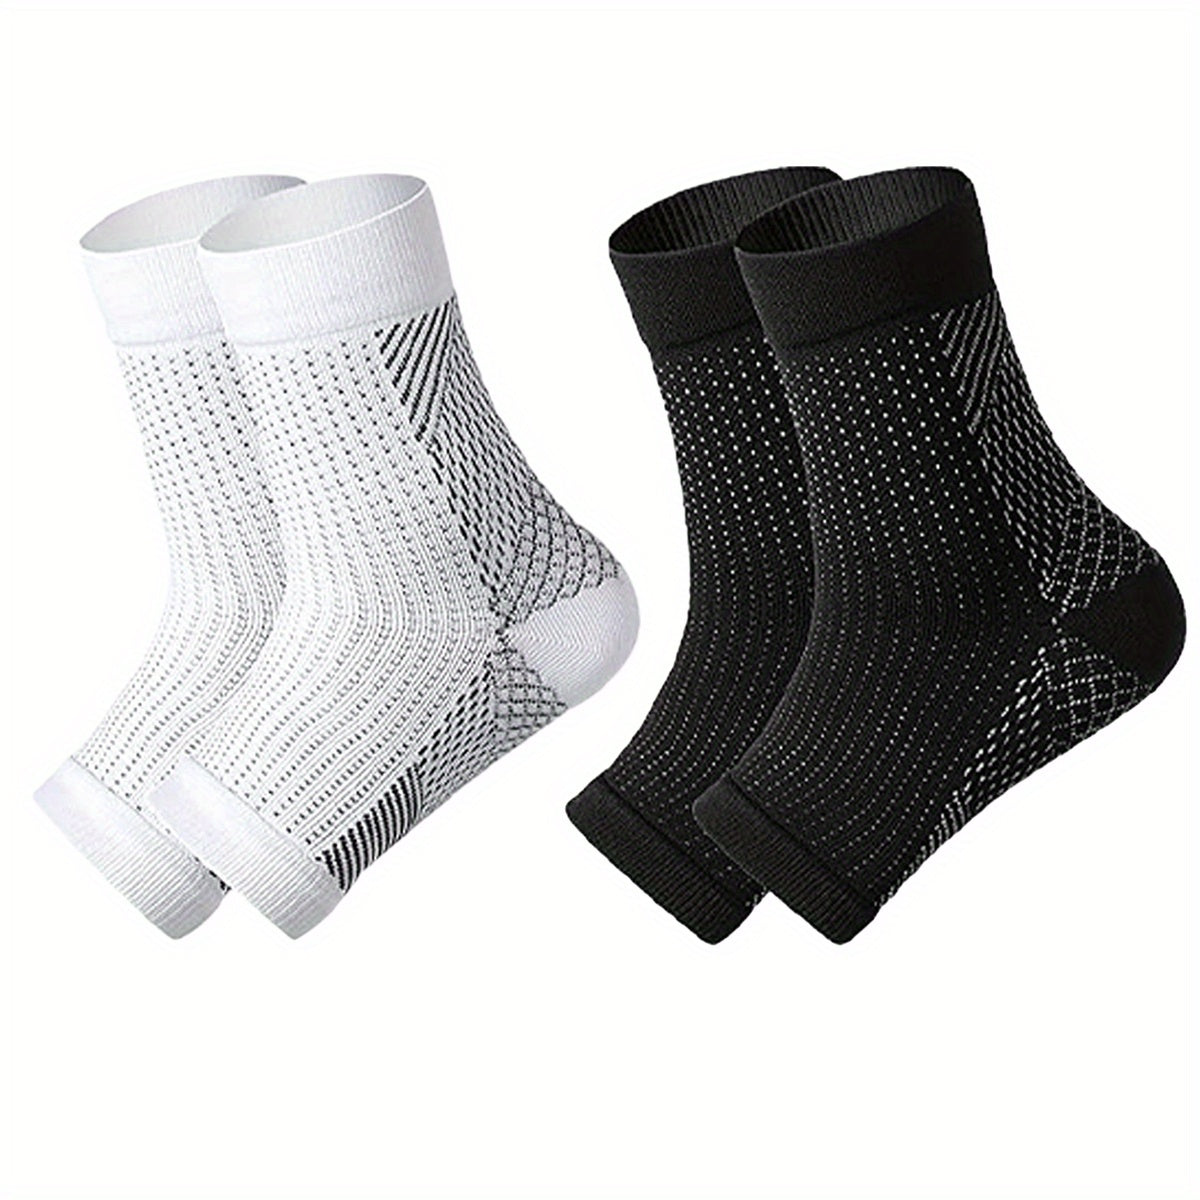 Black Neuropathy Compression Socks with targeted compression zones